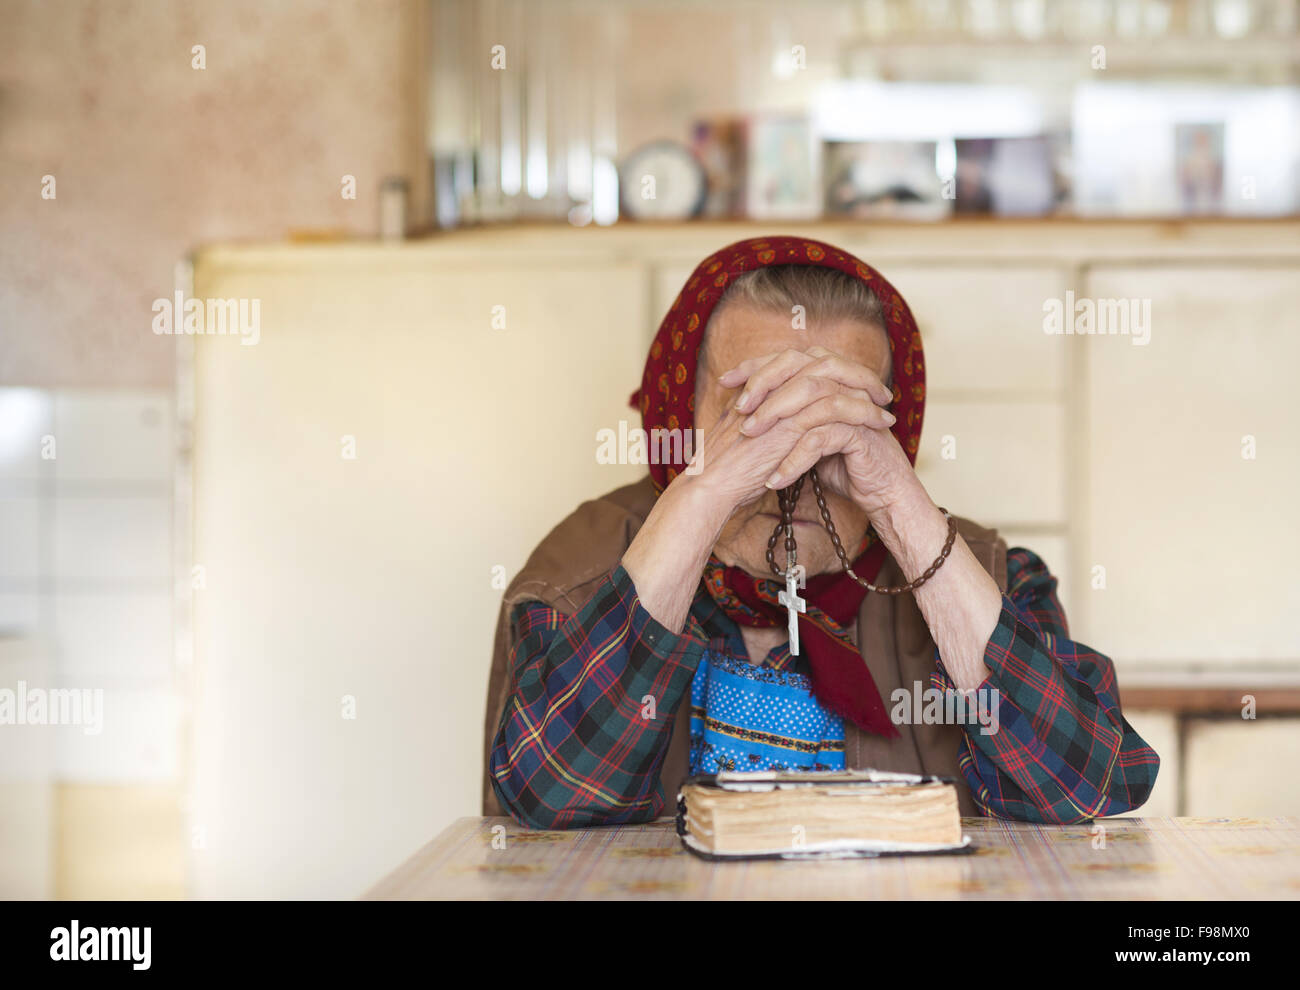 Very old woman wearing head scarf is praying in her country style kitchen Stock Photo